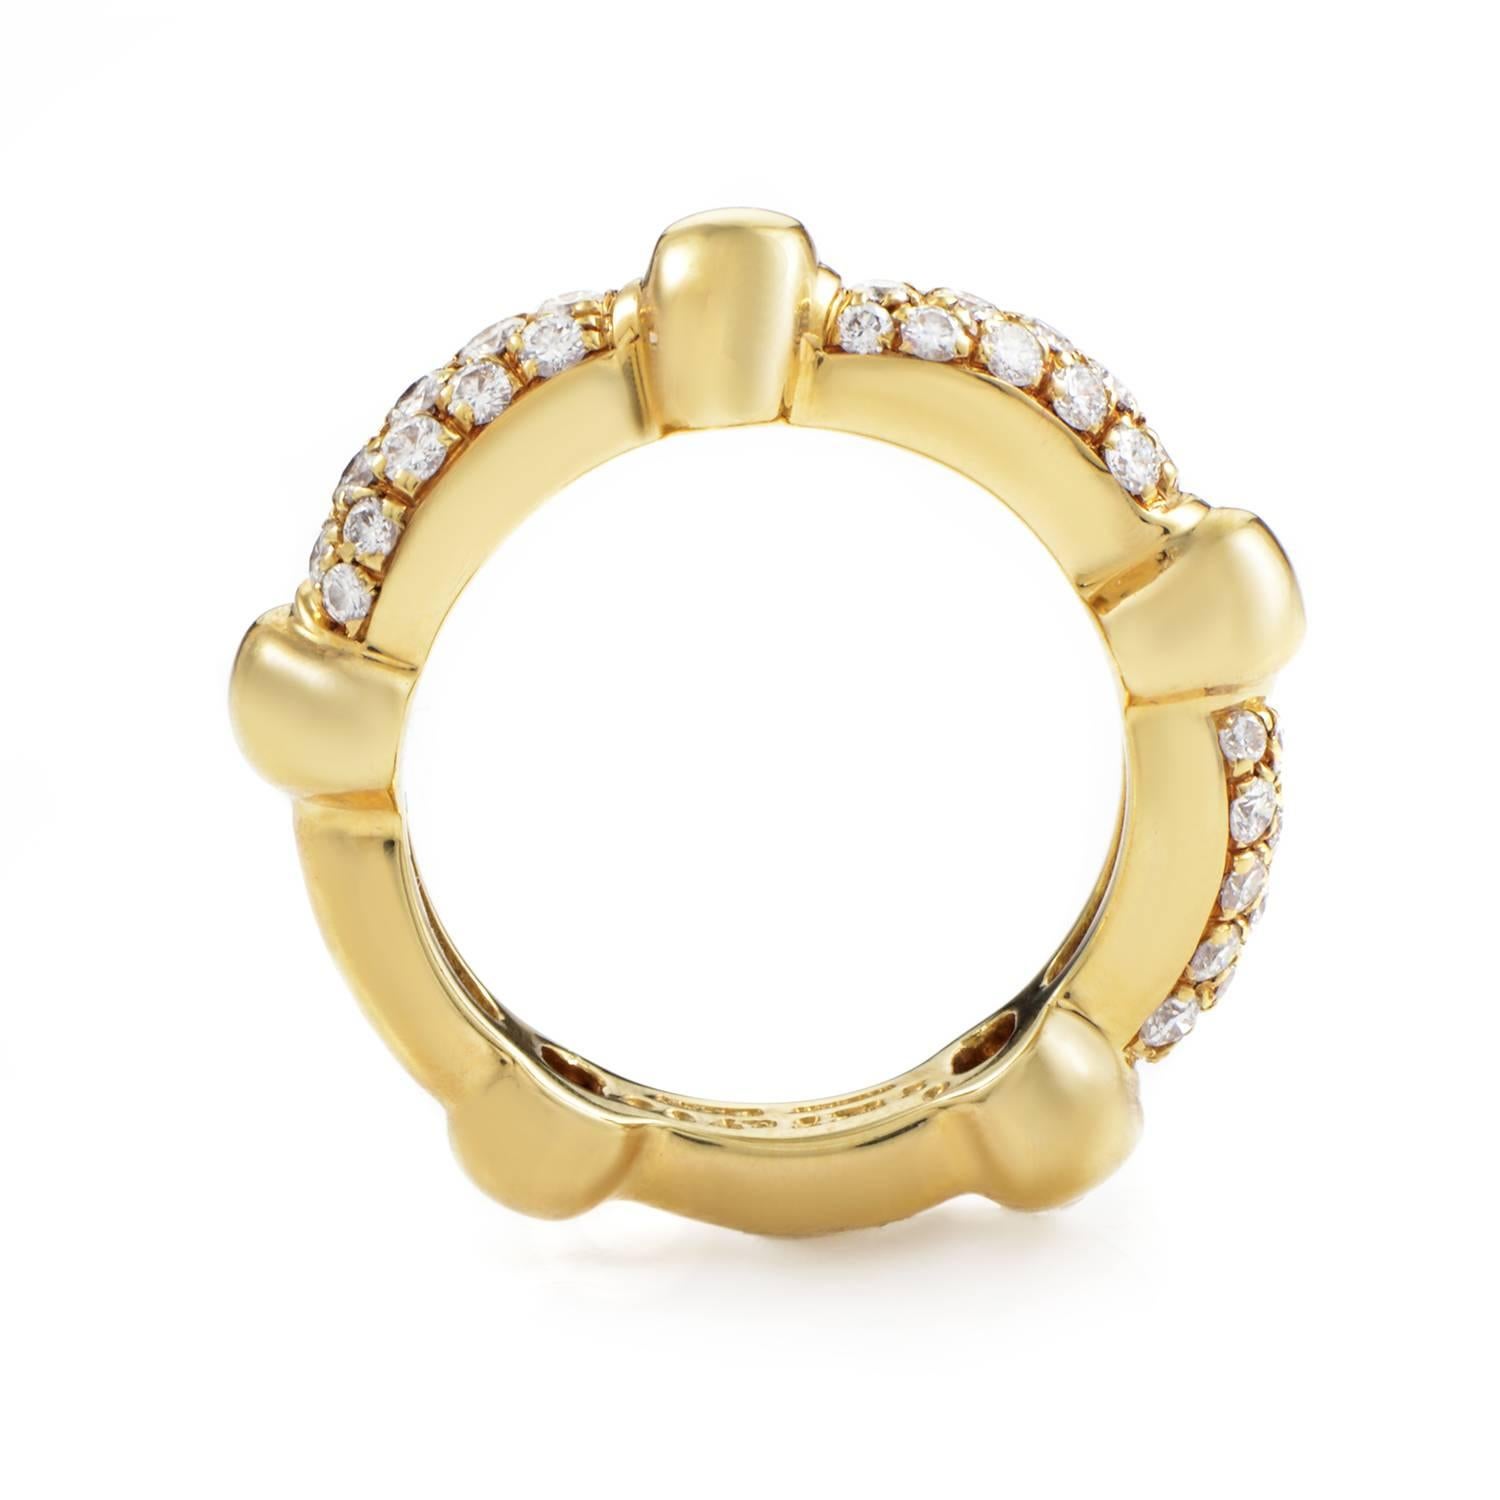 A wonderfully offbeat shape that flows in a smooth and irregular manner, this exceptional band from Boucheron is made of charming 18K yellow gold and adorned with glittering diamonds weighing in total 1.00 carat.

Ring Size: 5.5 (50 1/4)